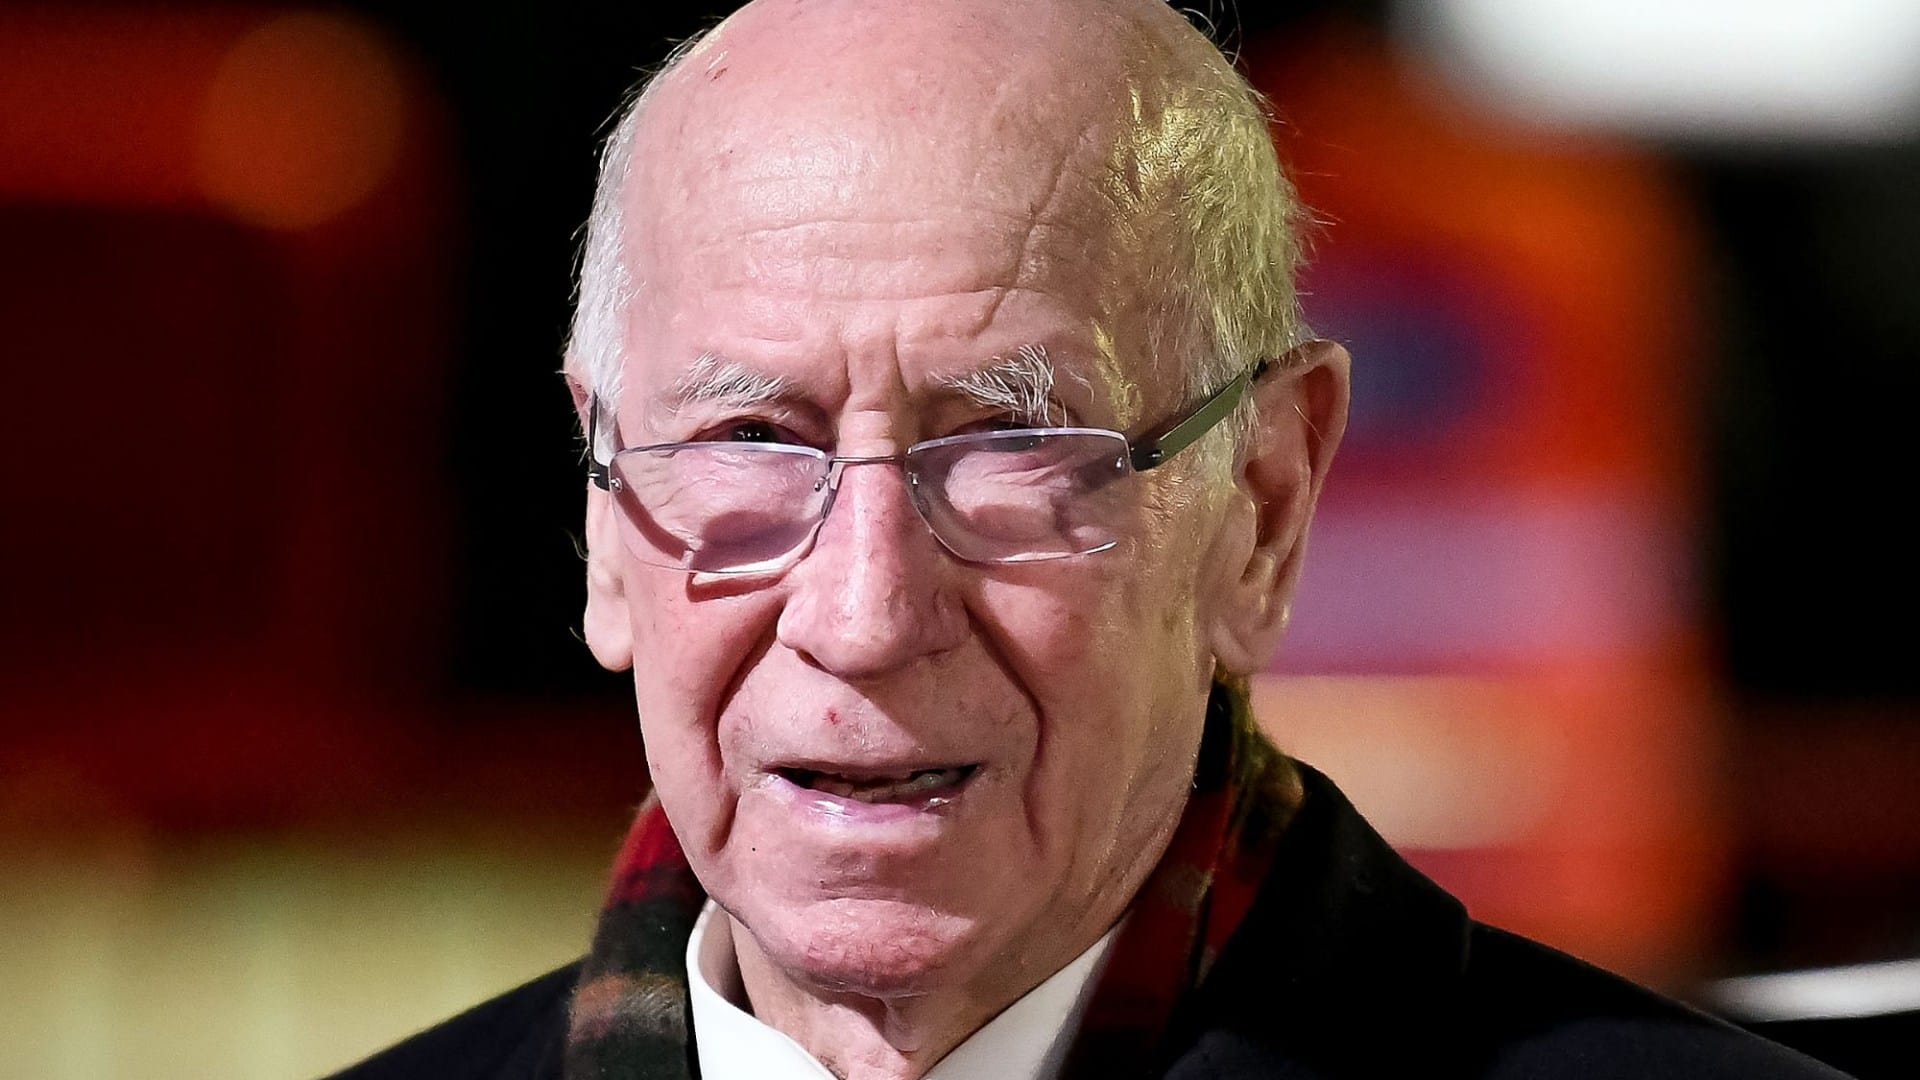 Sir Bobby Charlton dead: Manchester United and England World Cup hero dies aged 86 after dementia battle